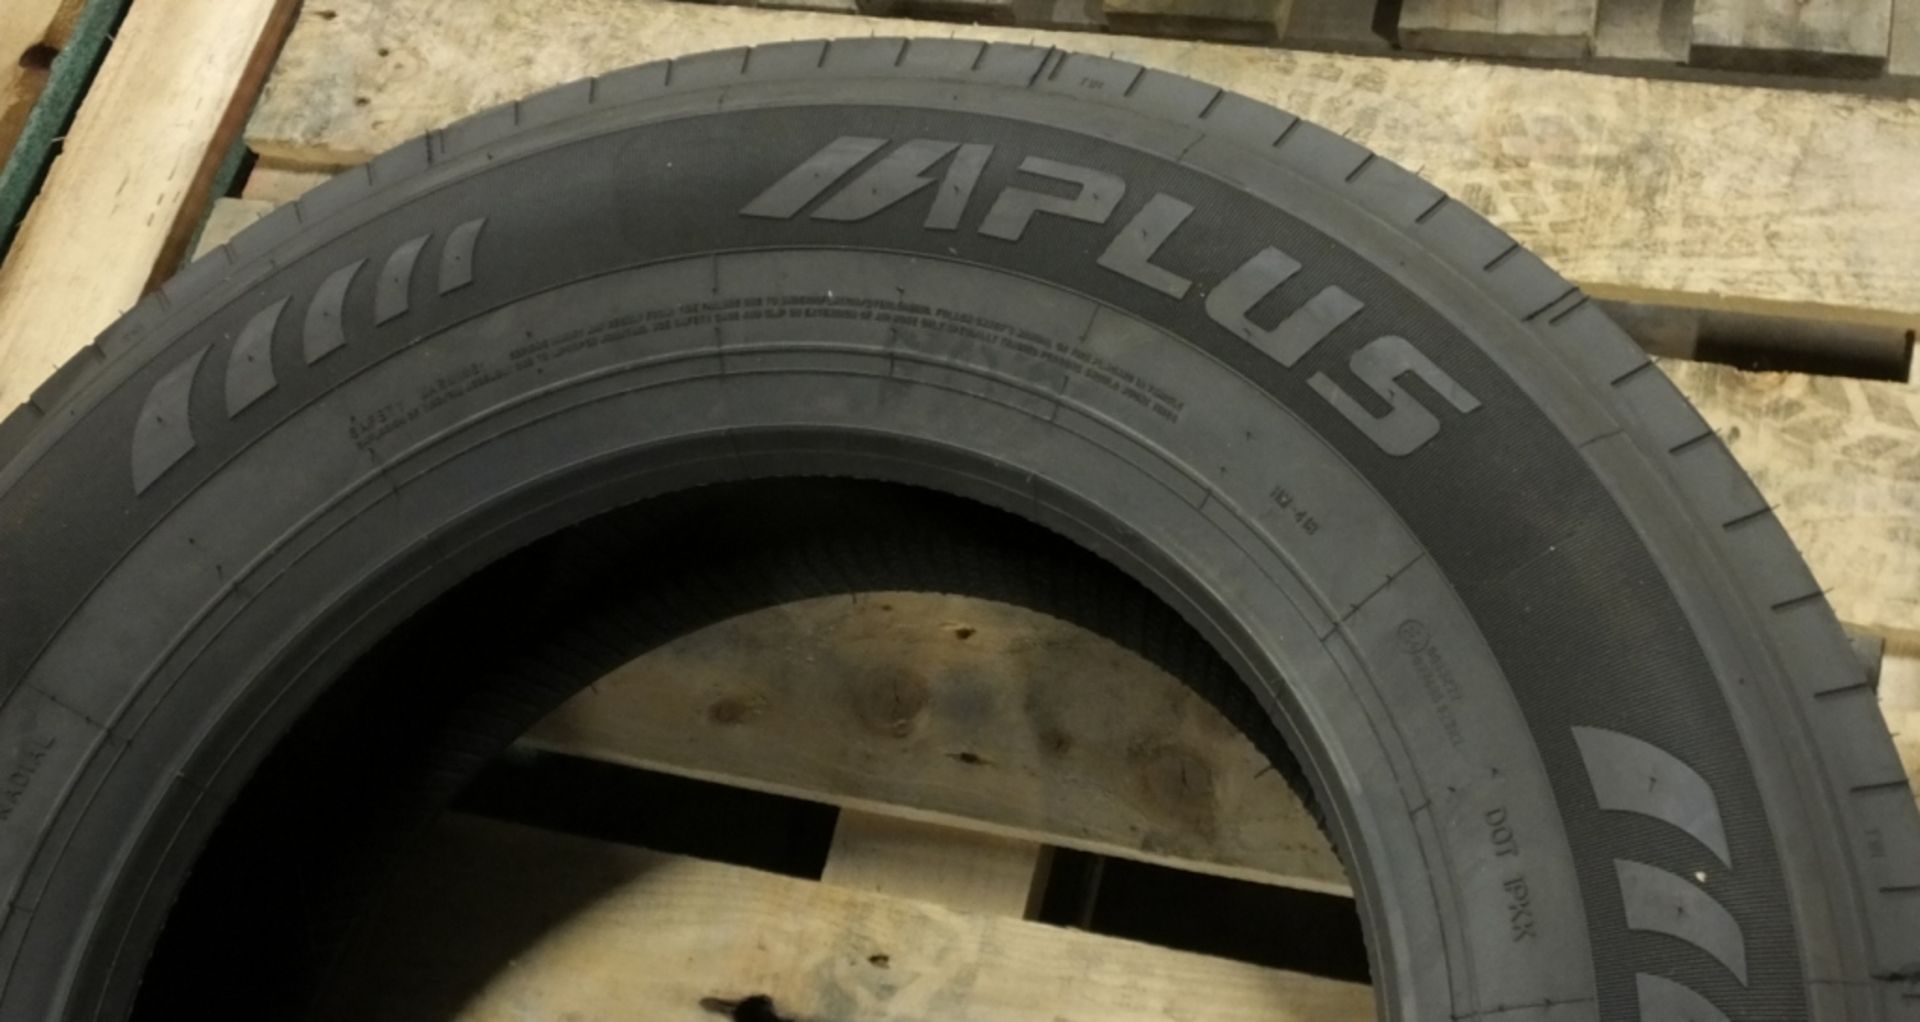 Alpus Commercial Tire - 265 / 70R 19.5 - S201 - Image 2 of 5